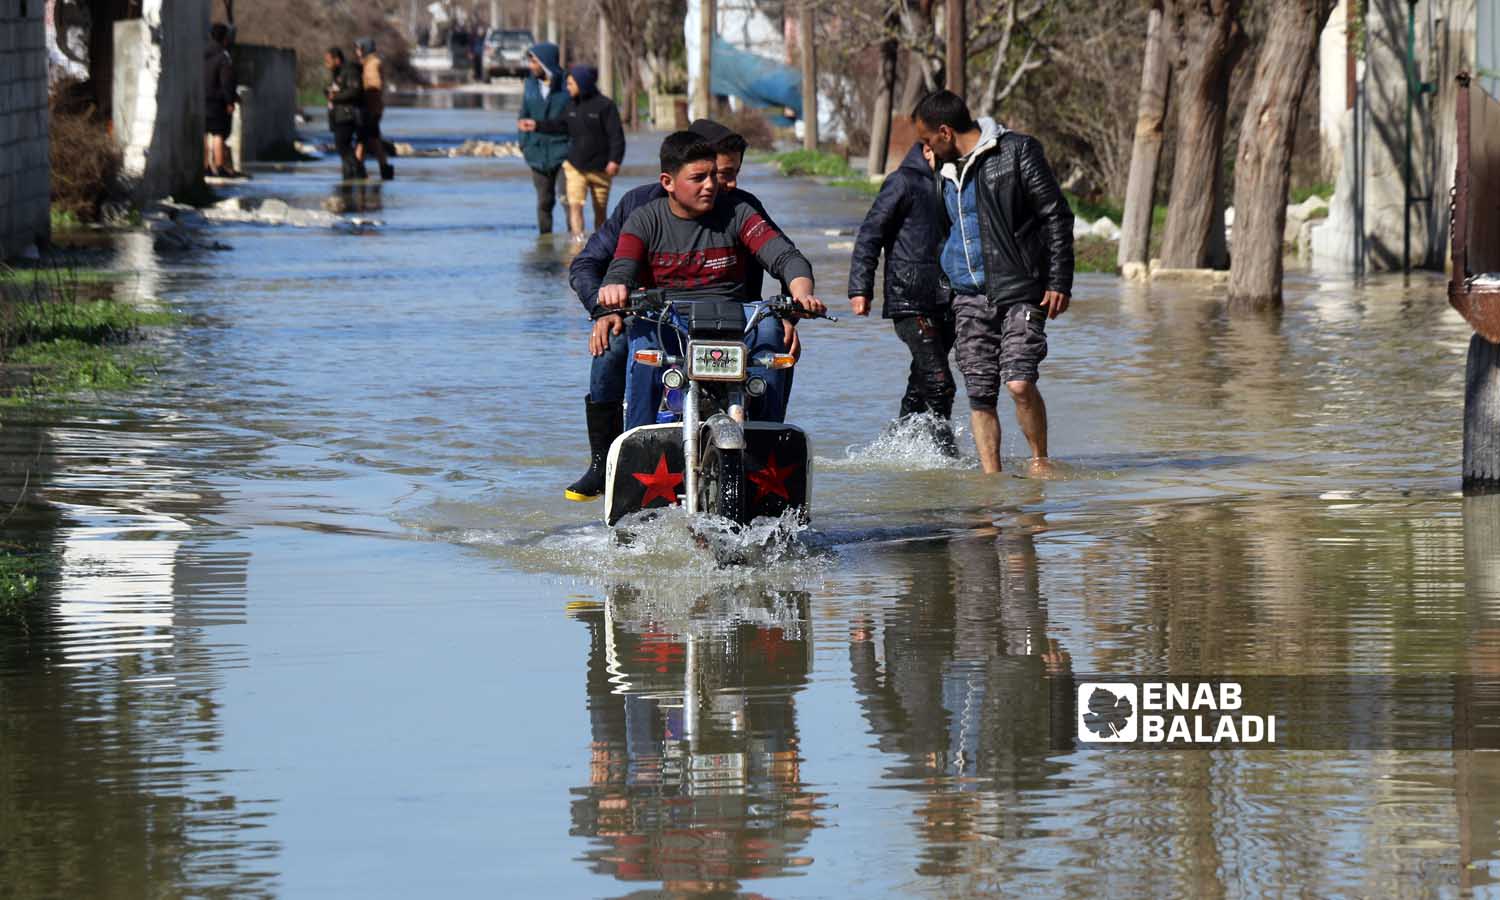 The streets of the village of al-Talul are flooded with water from the Orontes River due to its high levels - February 9, 2023 (Enab Baladi/Iyad Abdul Jawad)